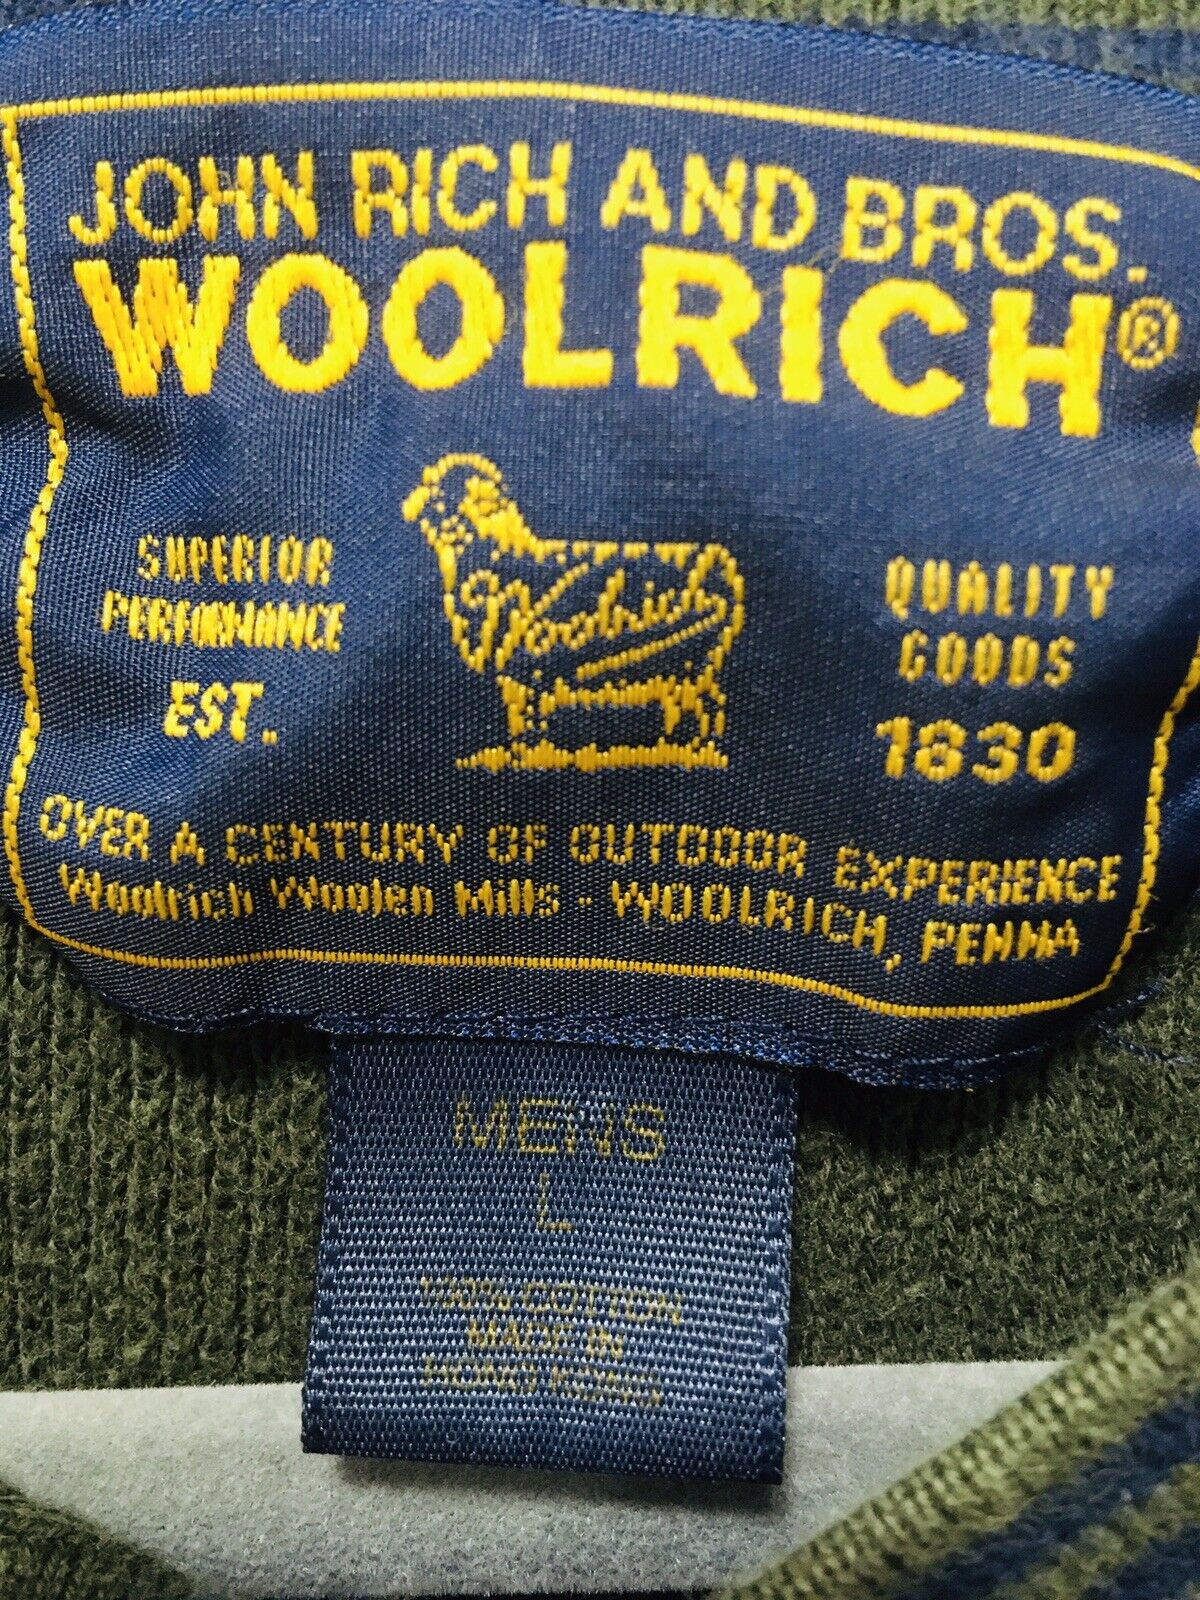 Vintage John Rich and Bros Woolrich 100%Cotton sw… - image 3